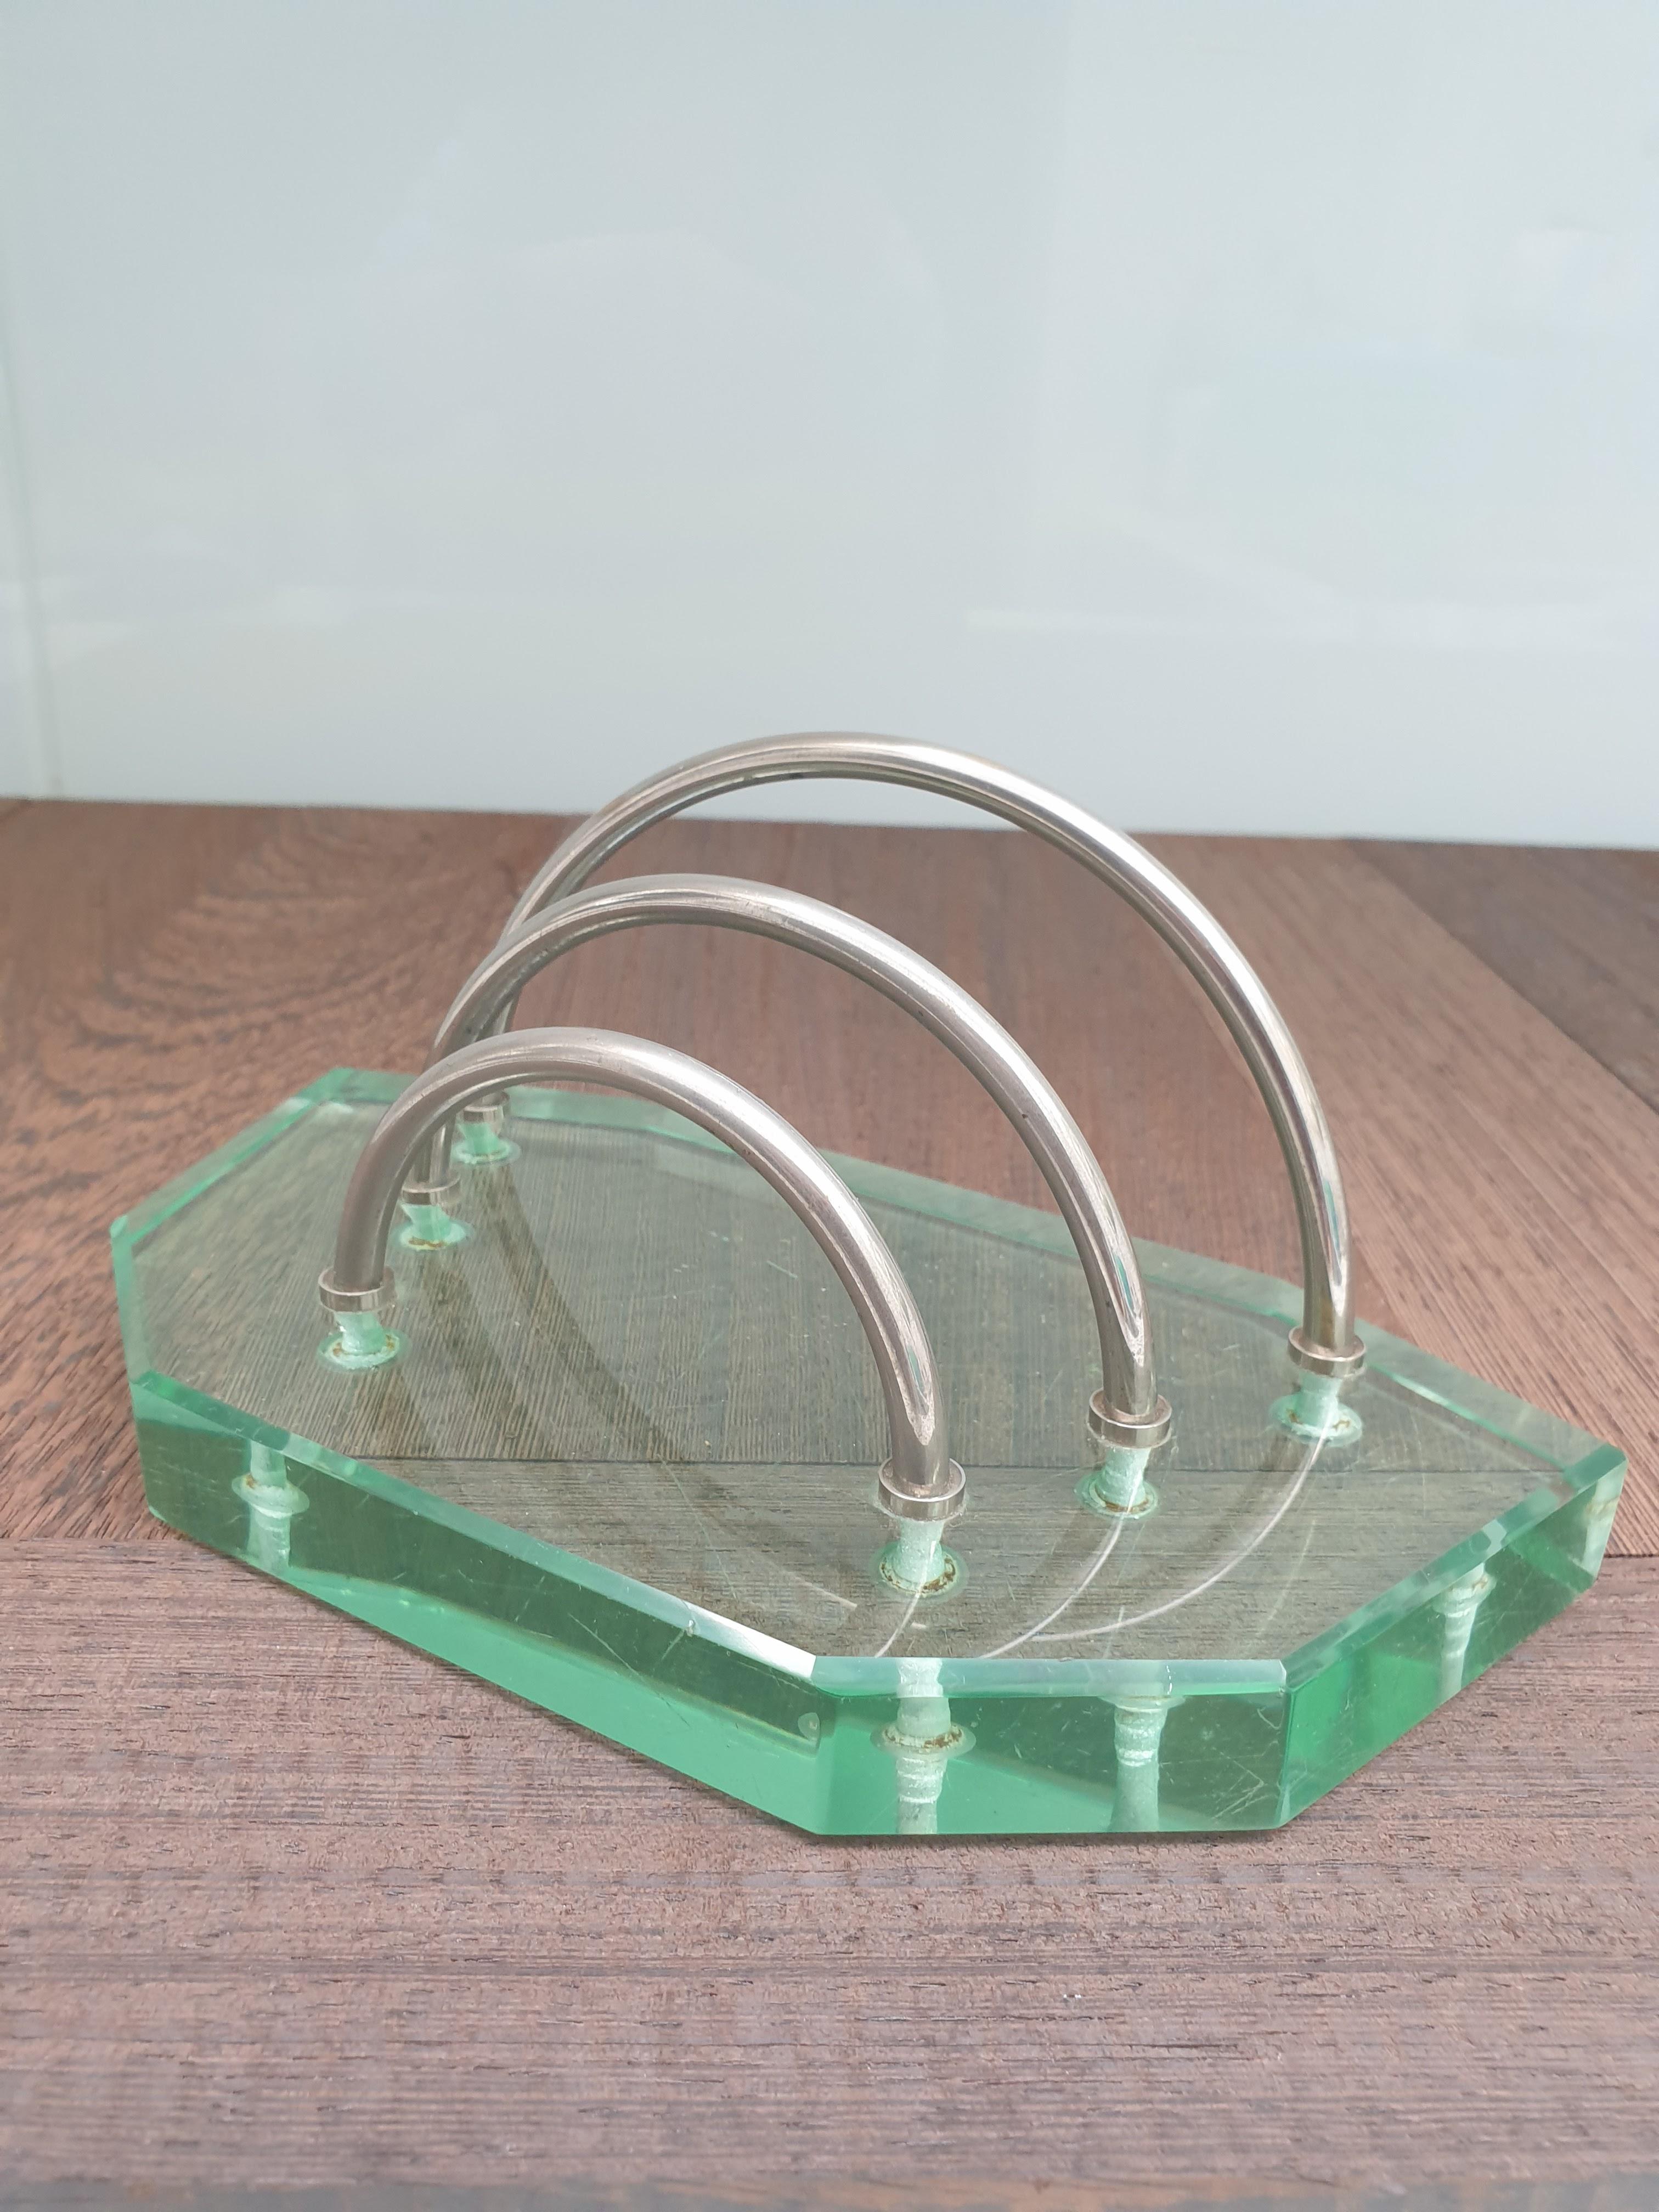 Thick pale glass letter rack useful for a desk. This is an early Model due to the pale green colour of the glass. The metal partitions that  hold the letters are in nickel. The glass itself is very thick 2cm deep as befits the quality of the